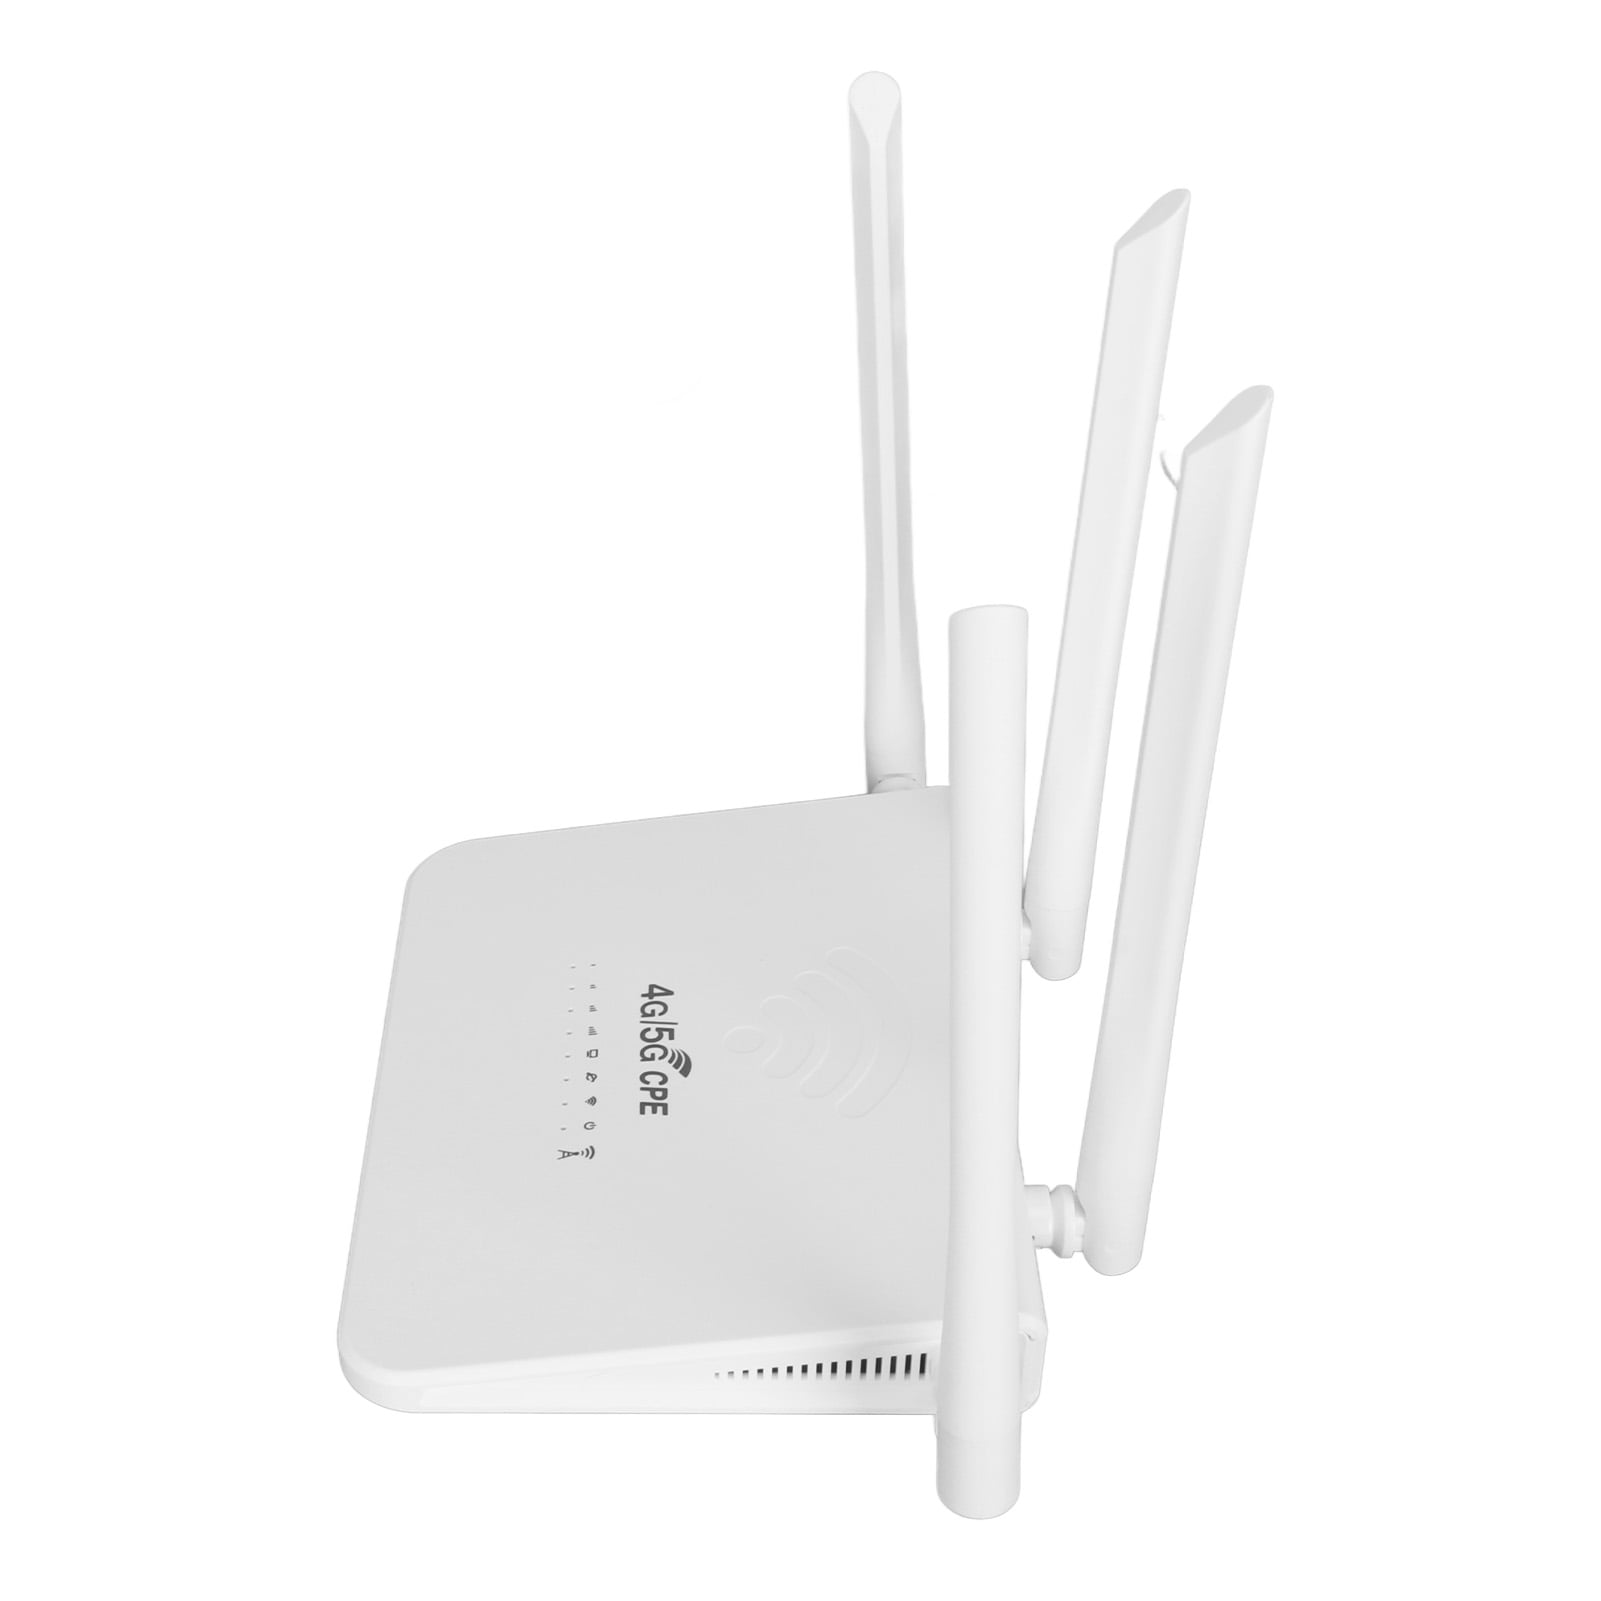 4G LTE Wireless Router With SIM Card Slot, CPE R103 5M 4G LTE